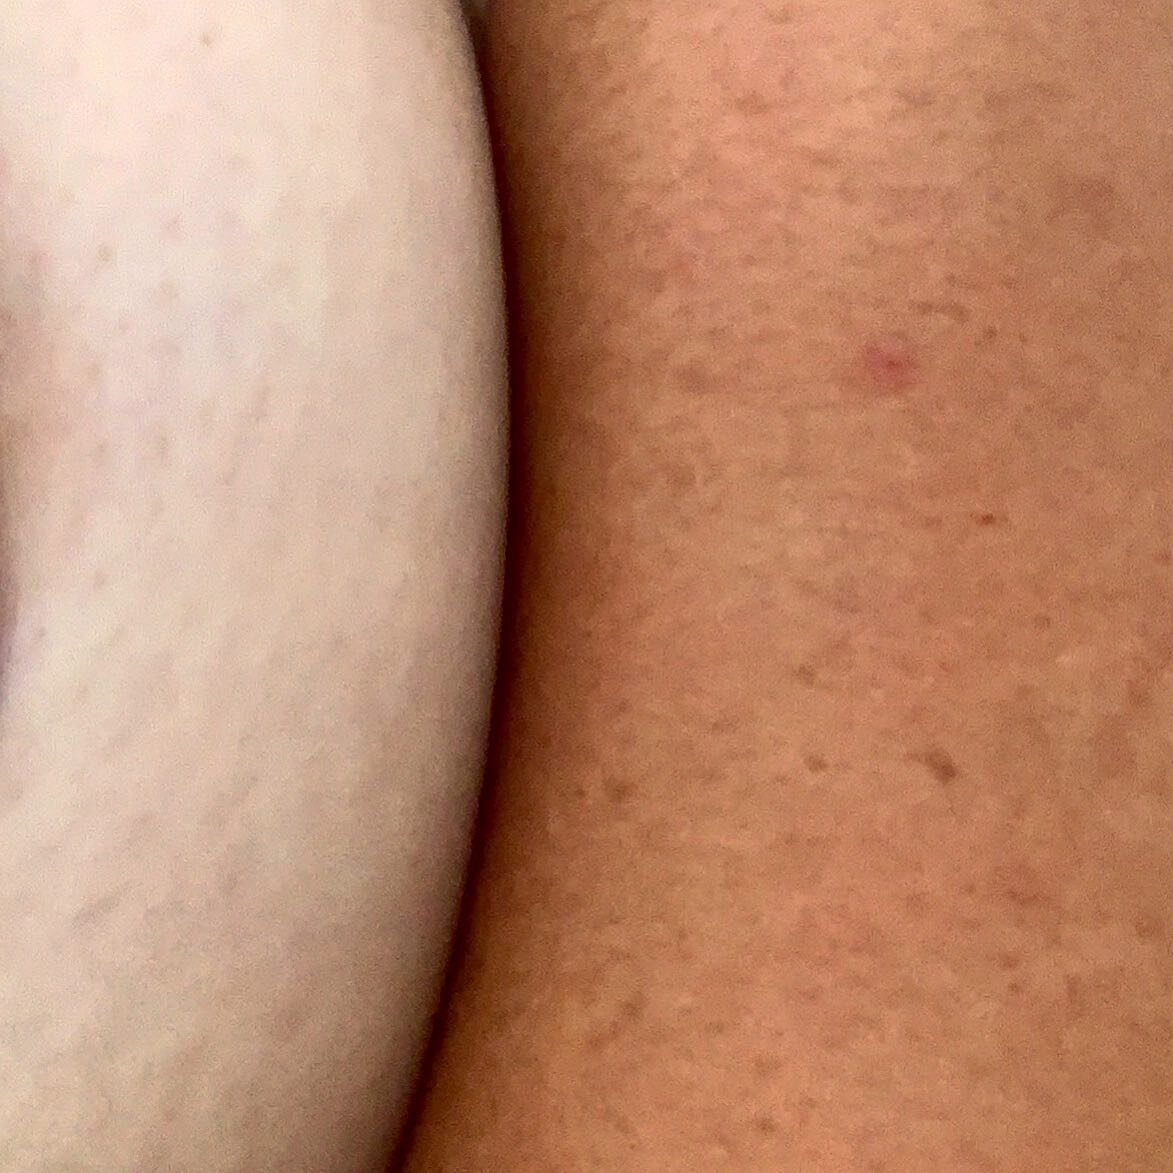 Every summer, the Levantine genes and the Nordic genes have a showdown 😂 Yes, these are both on my body. My parents aggressively different ethnicities like to fight it out on my skin. This is why foundation is stressful !!!